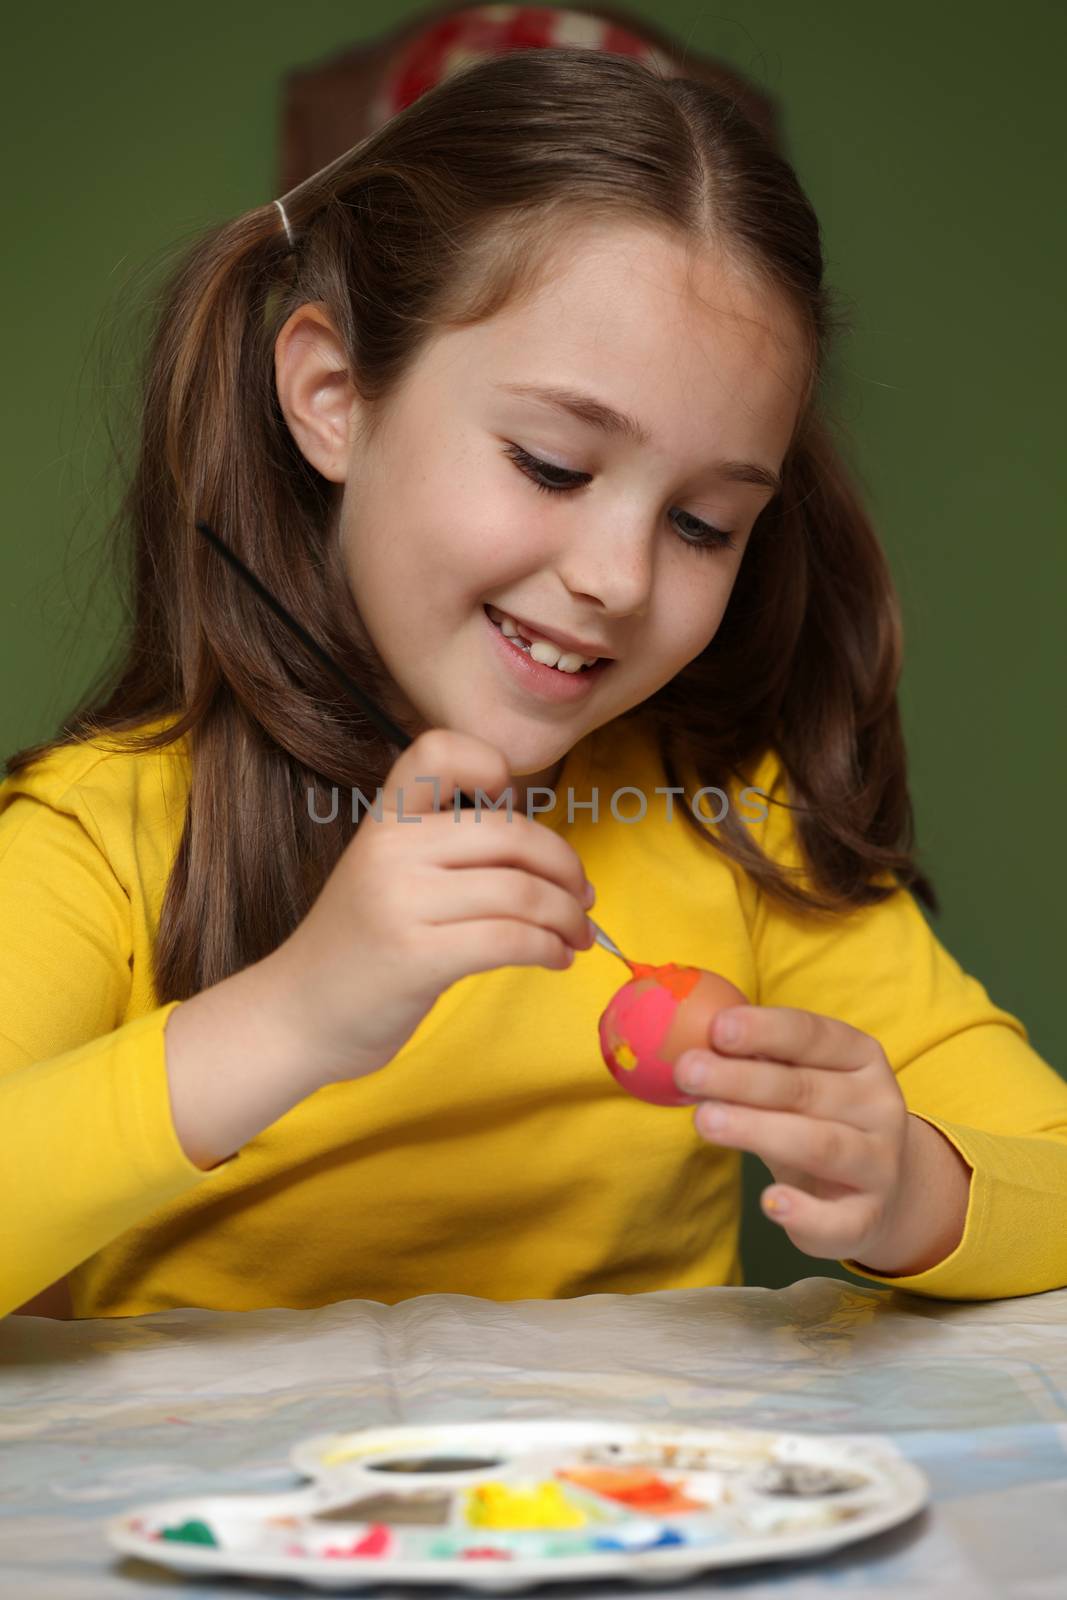 Girl painted Easter eggs at the table 